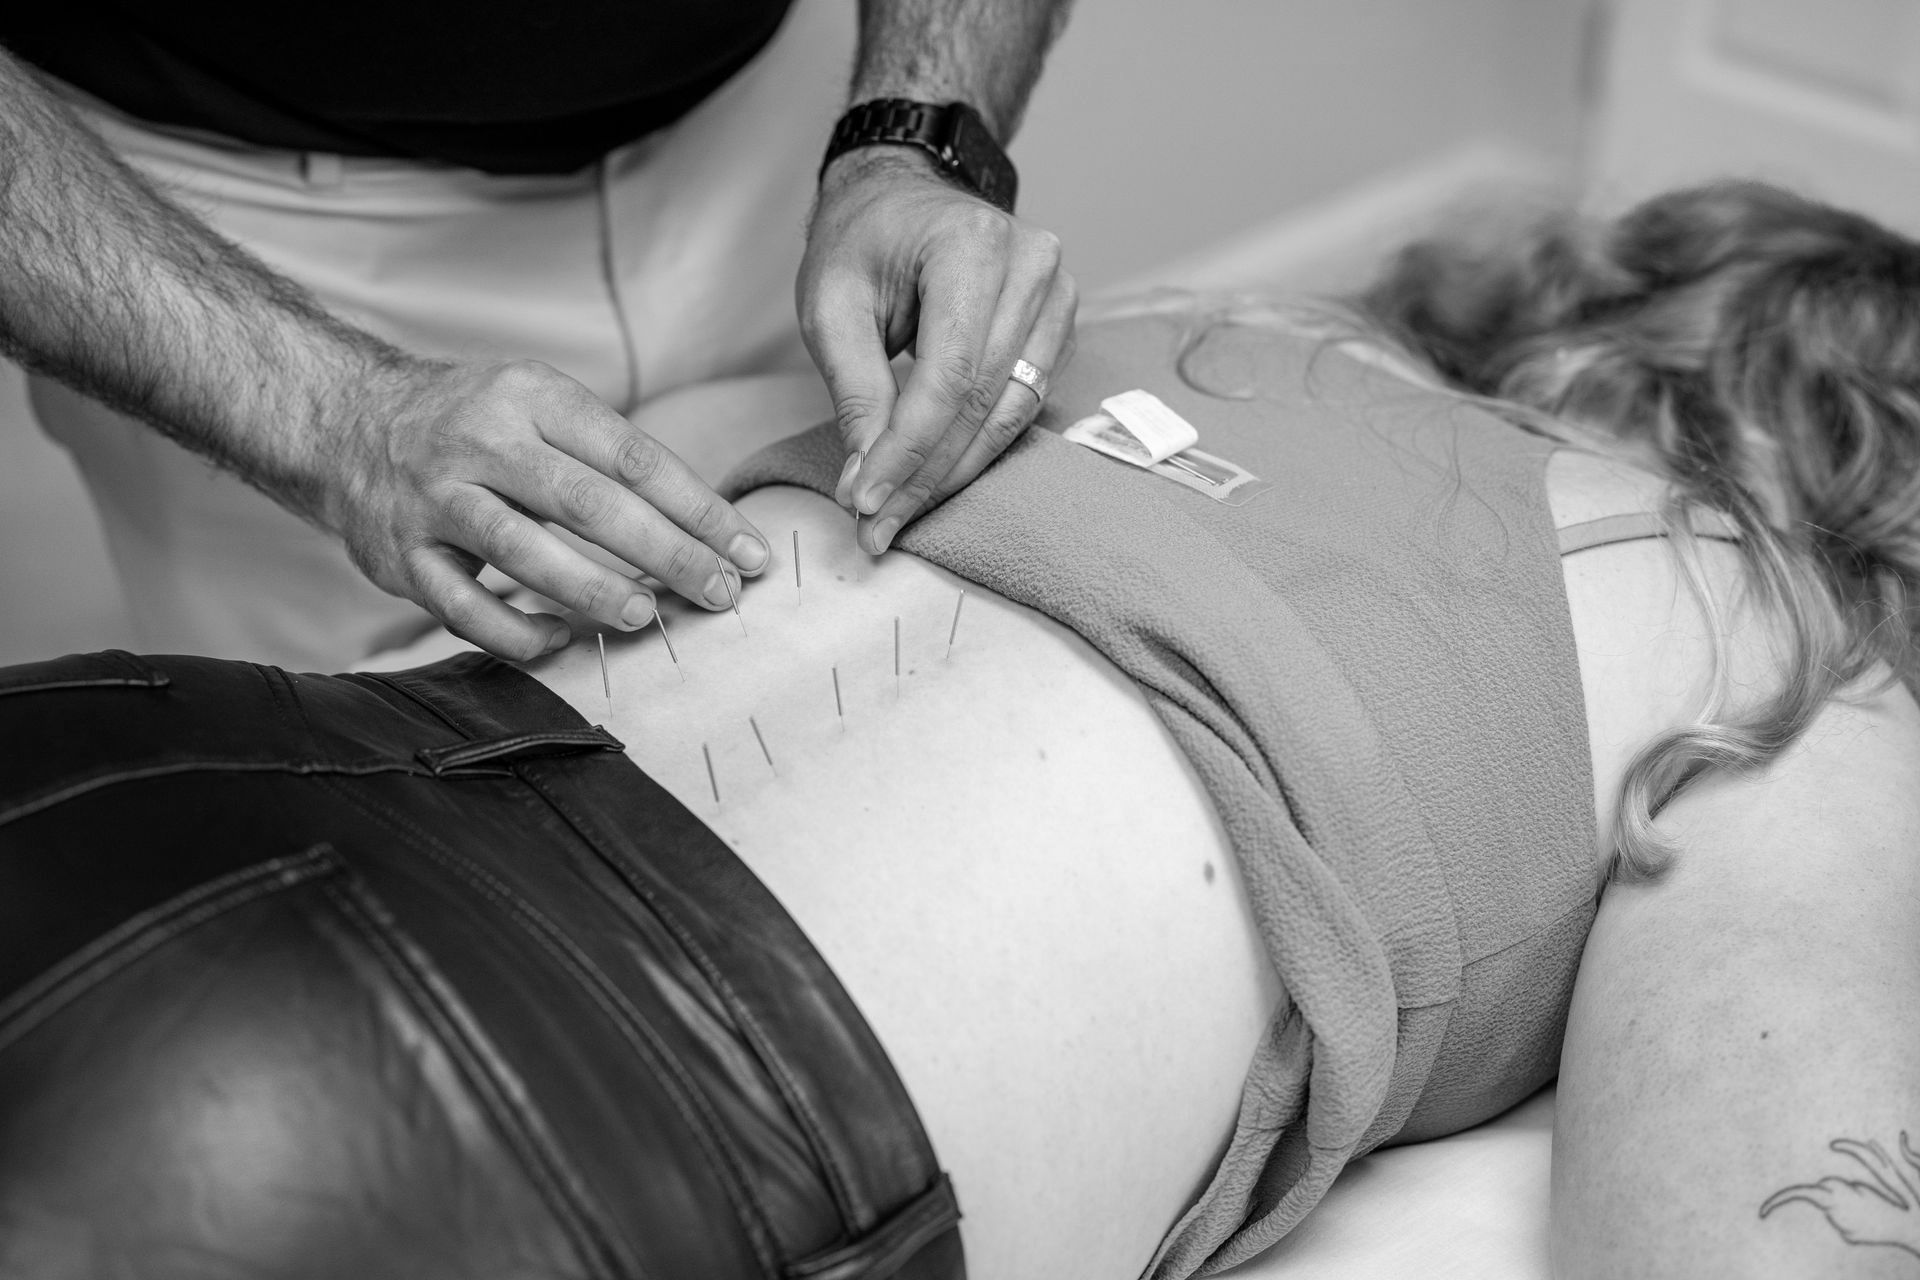 A black and white photo of a woman getting acupuncture on her back.